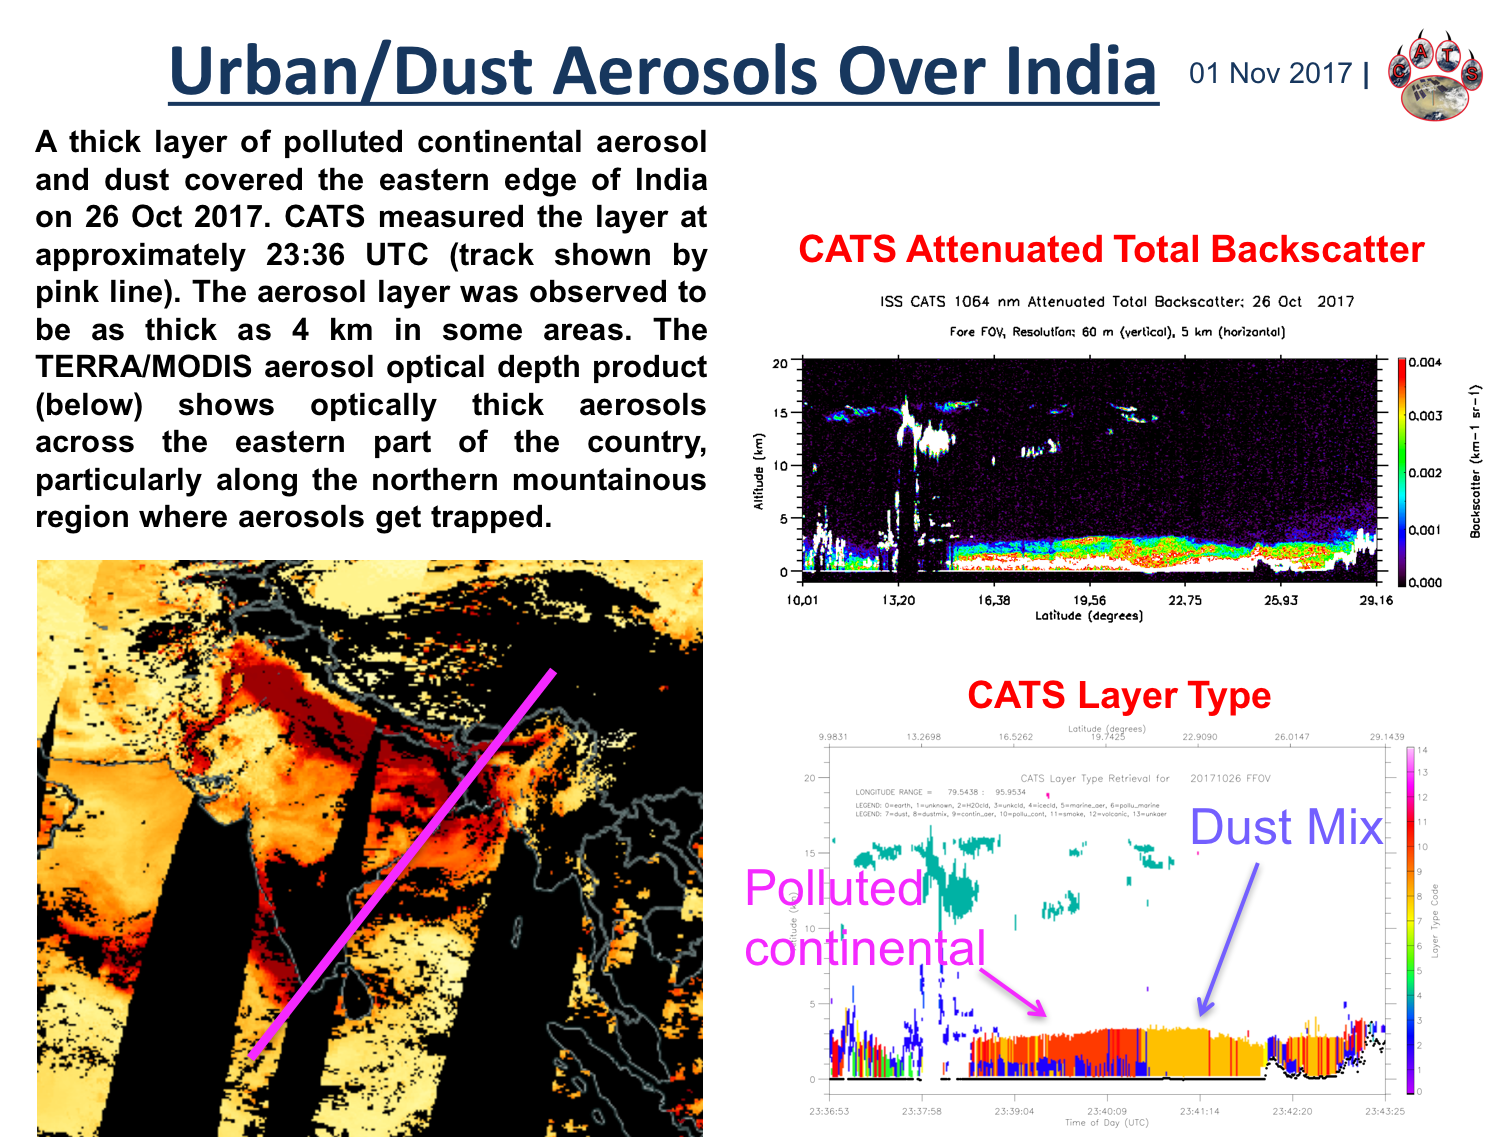 Dust and Pollution in India